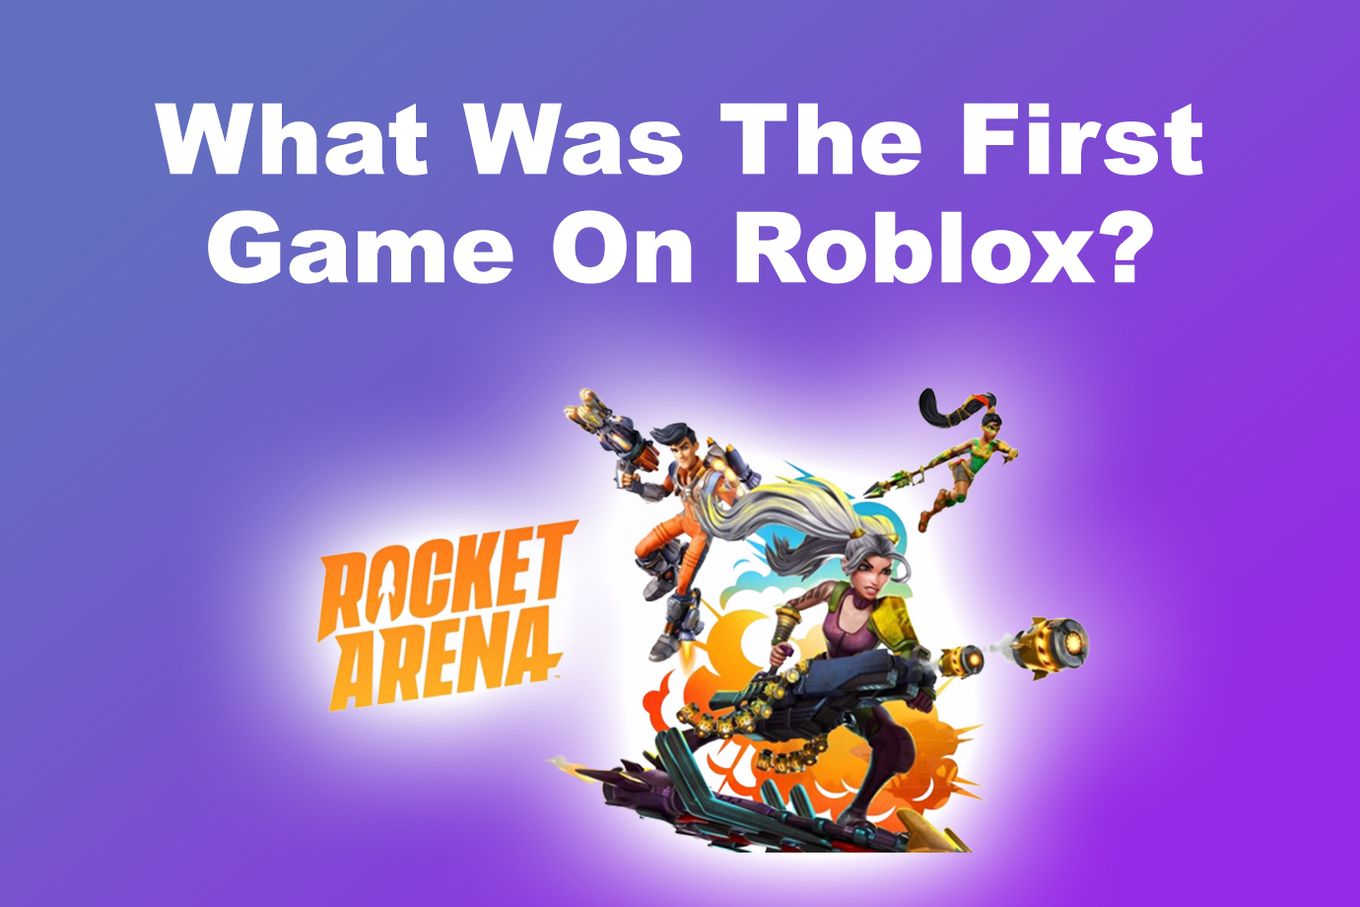 What Was The First Game On Roblox?